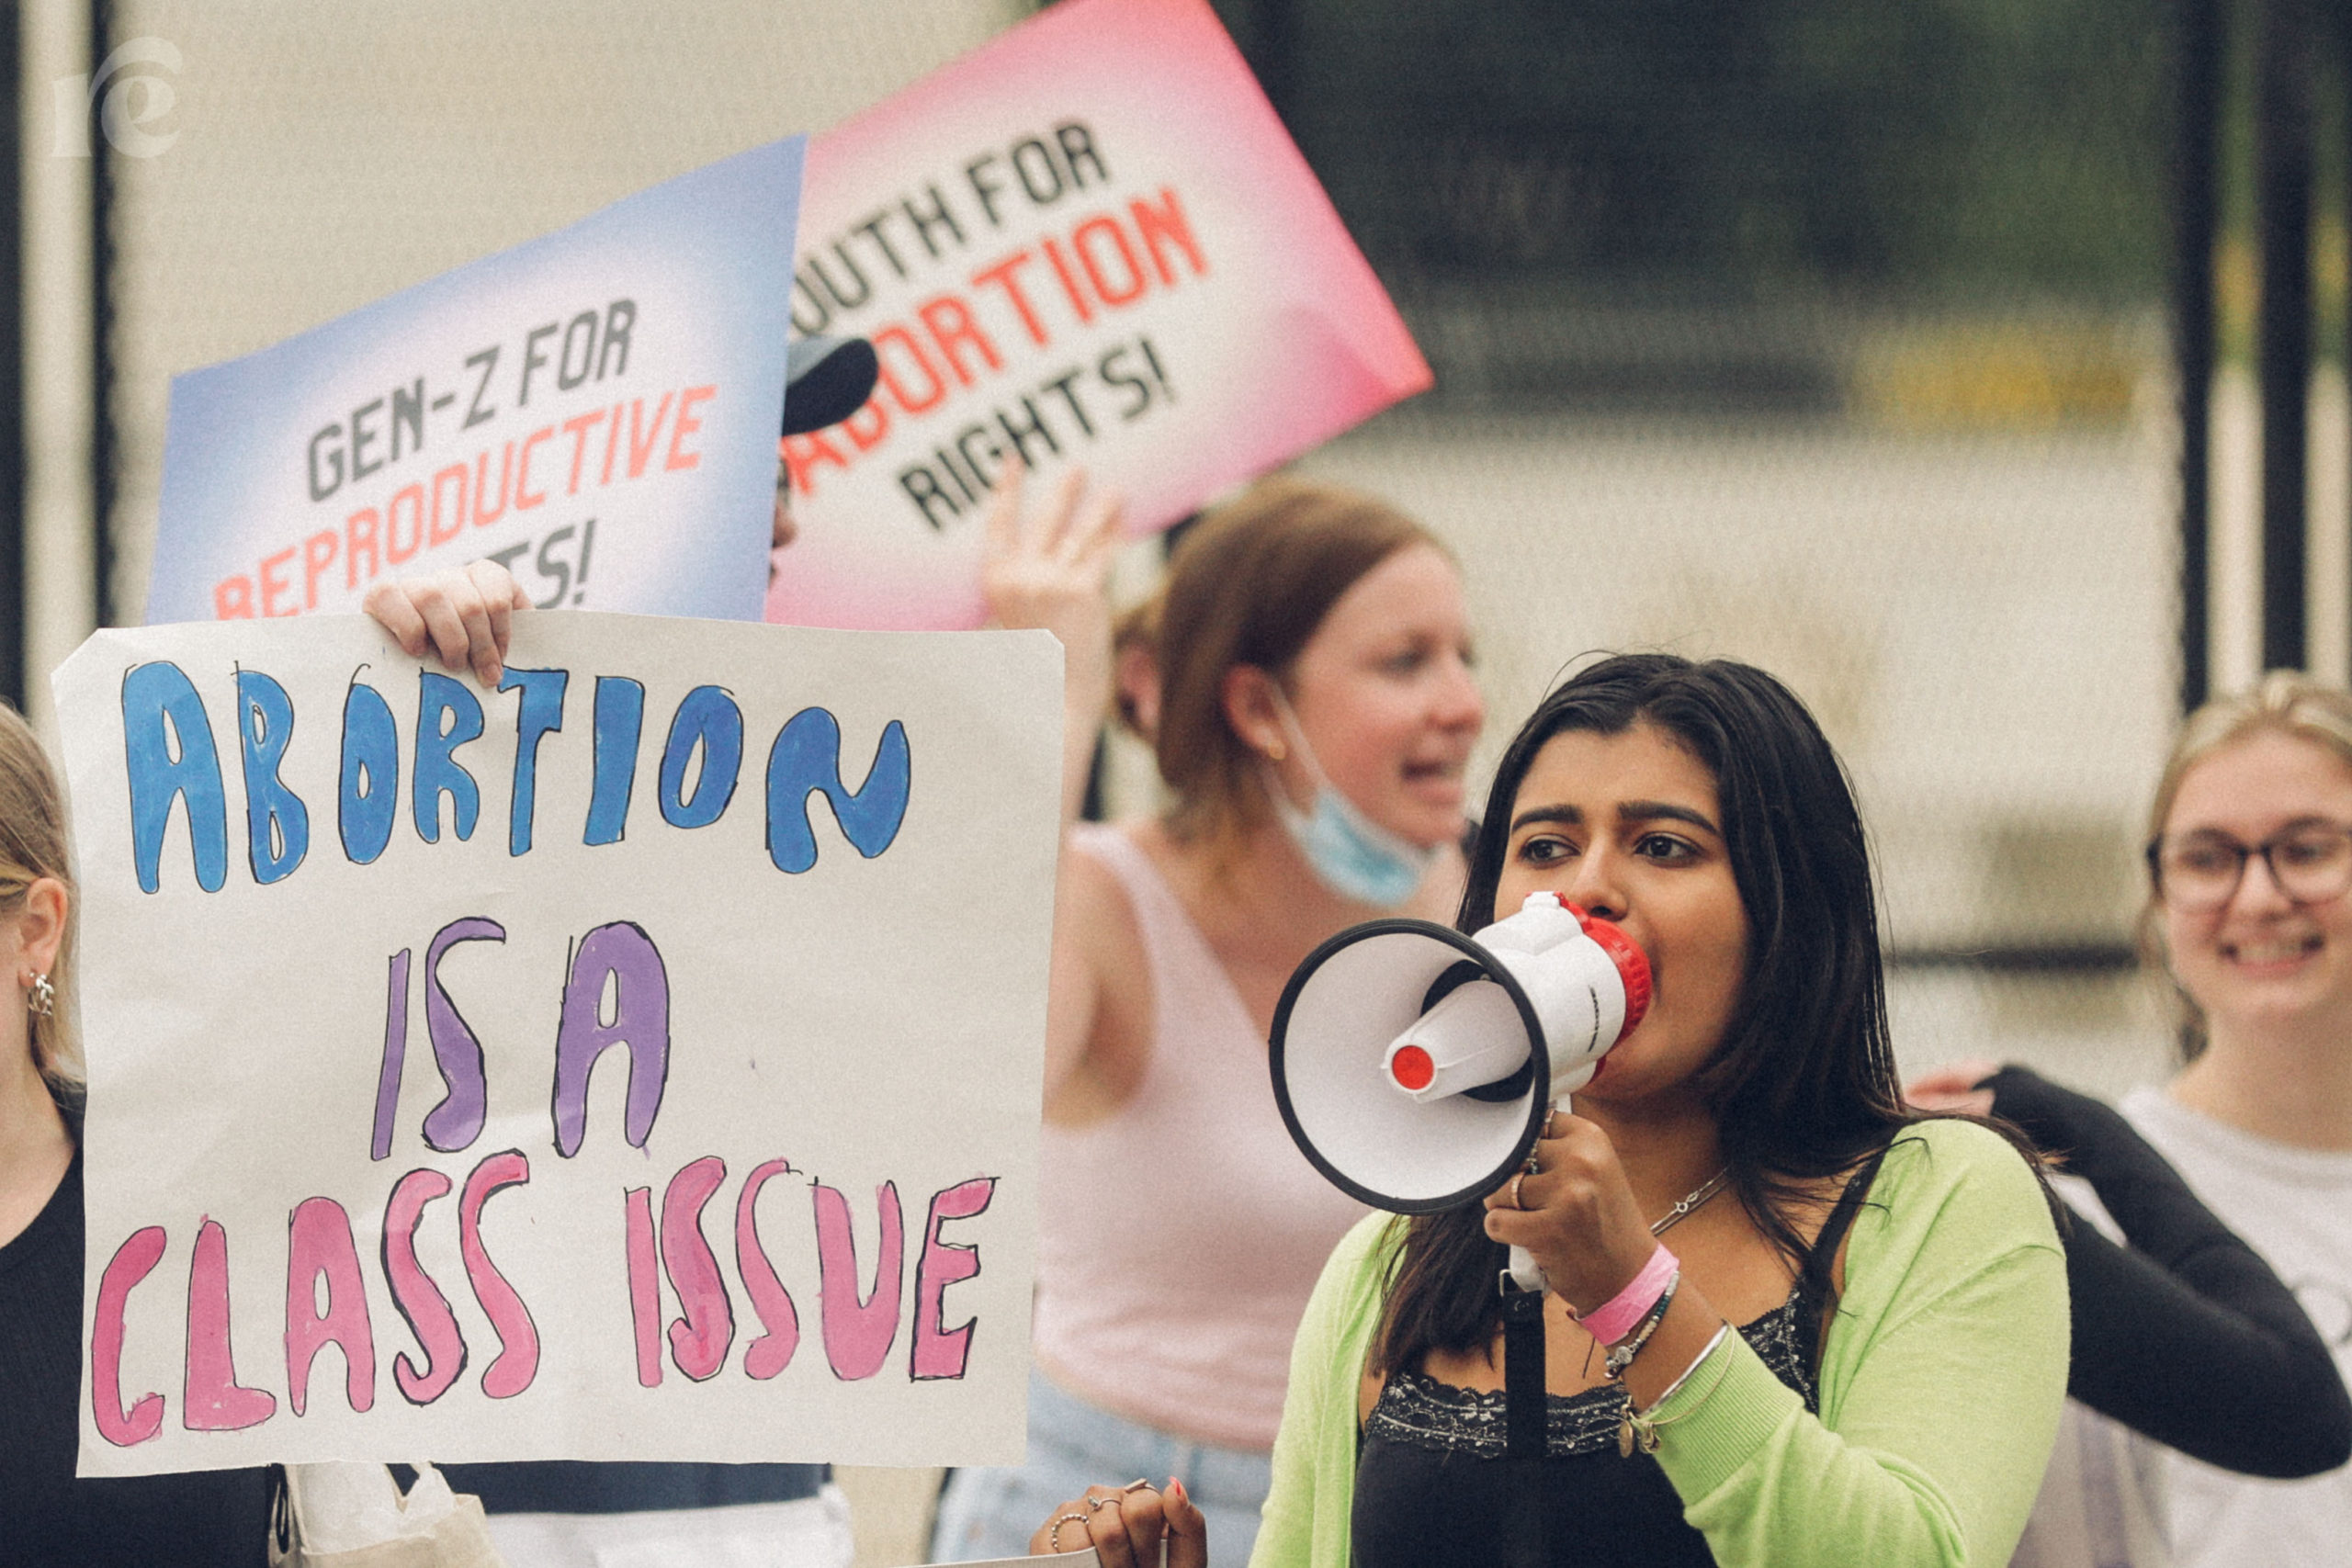 Abortion rights photo of a person holding a sign reading Abortion Is a Class Issue